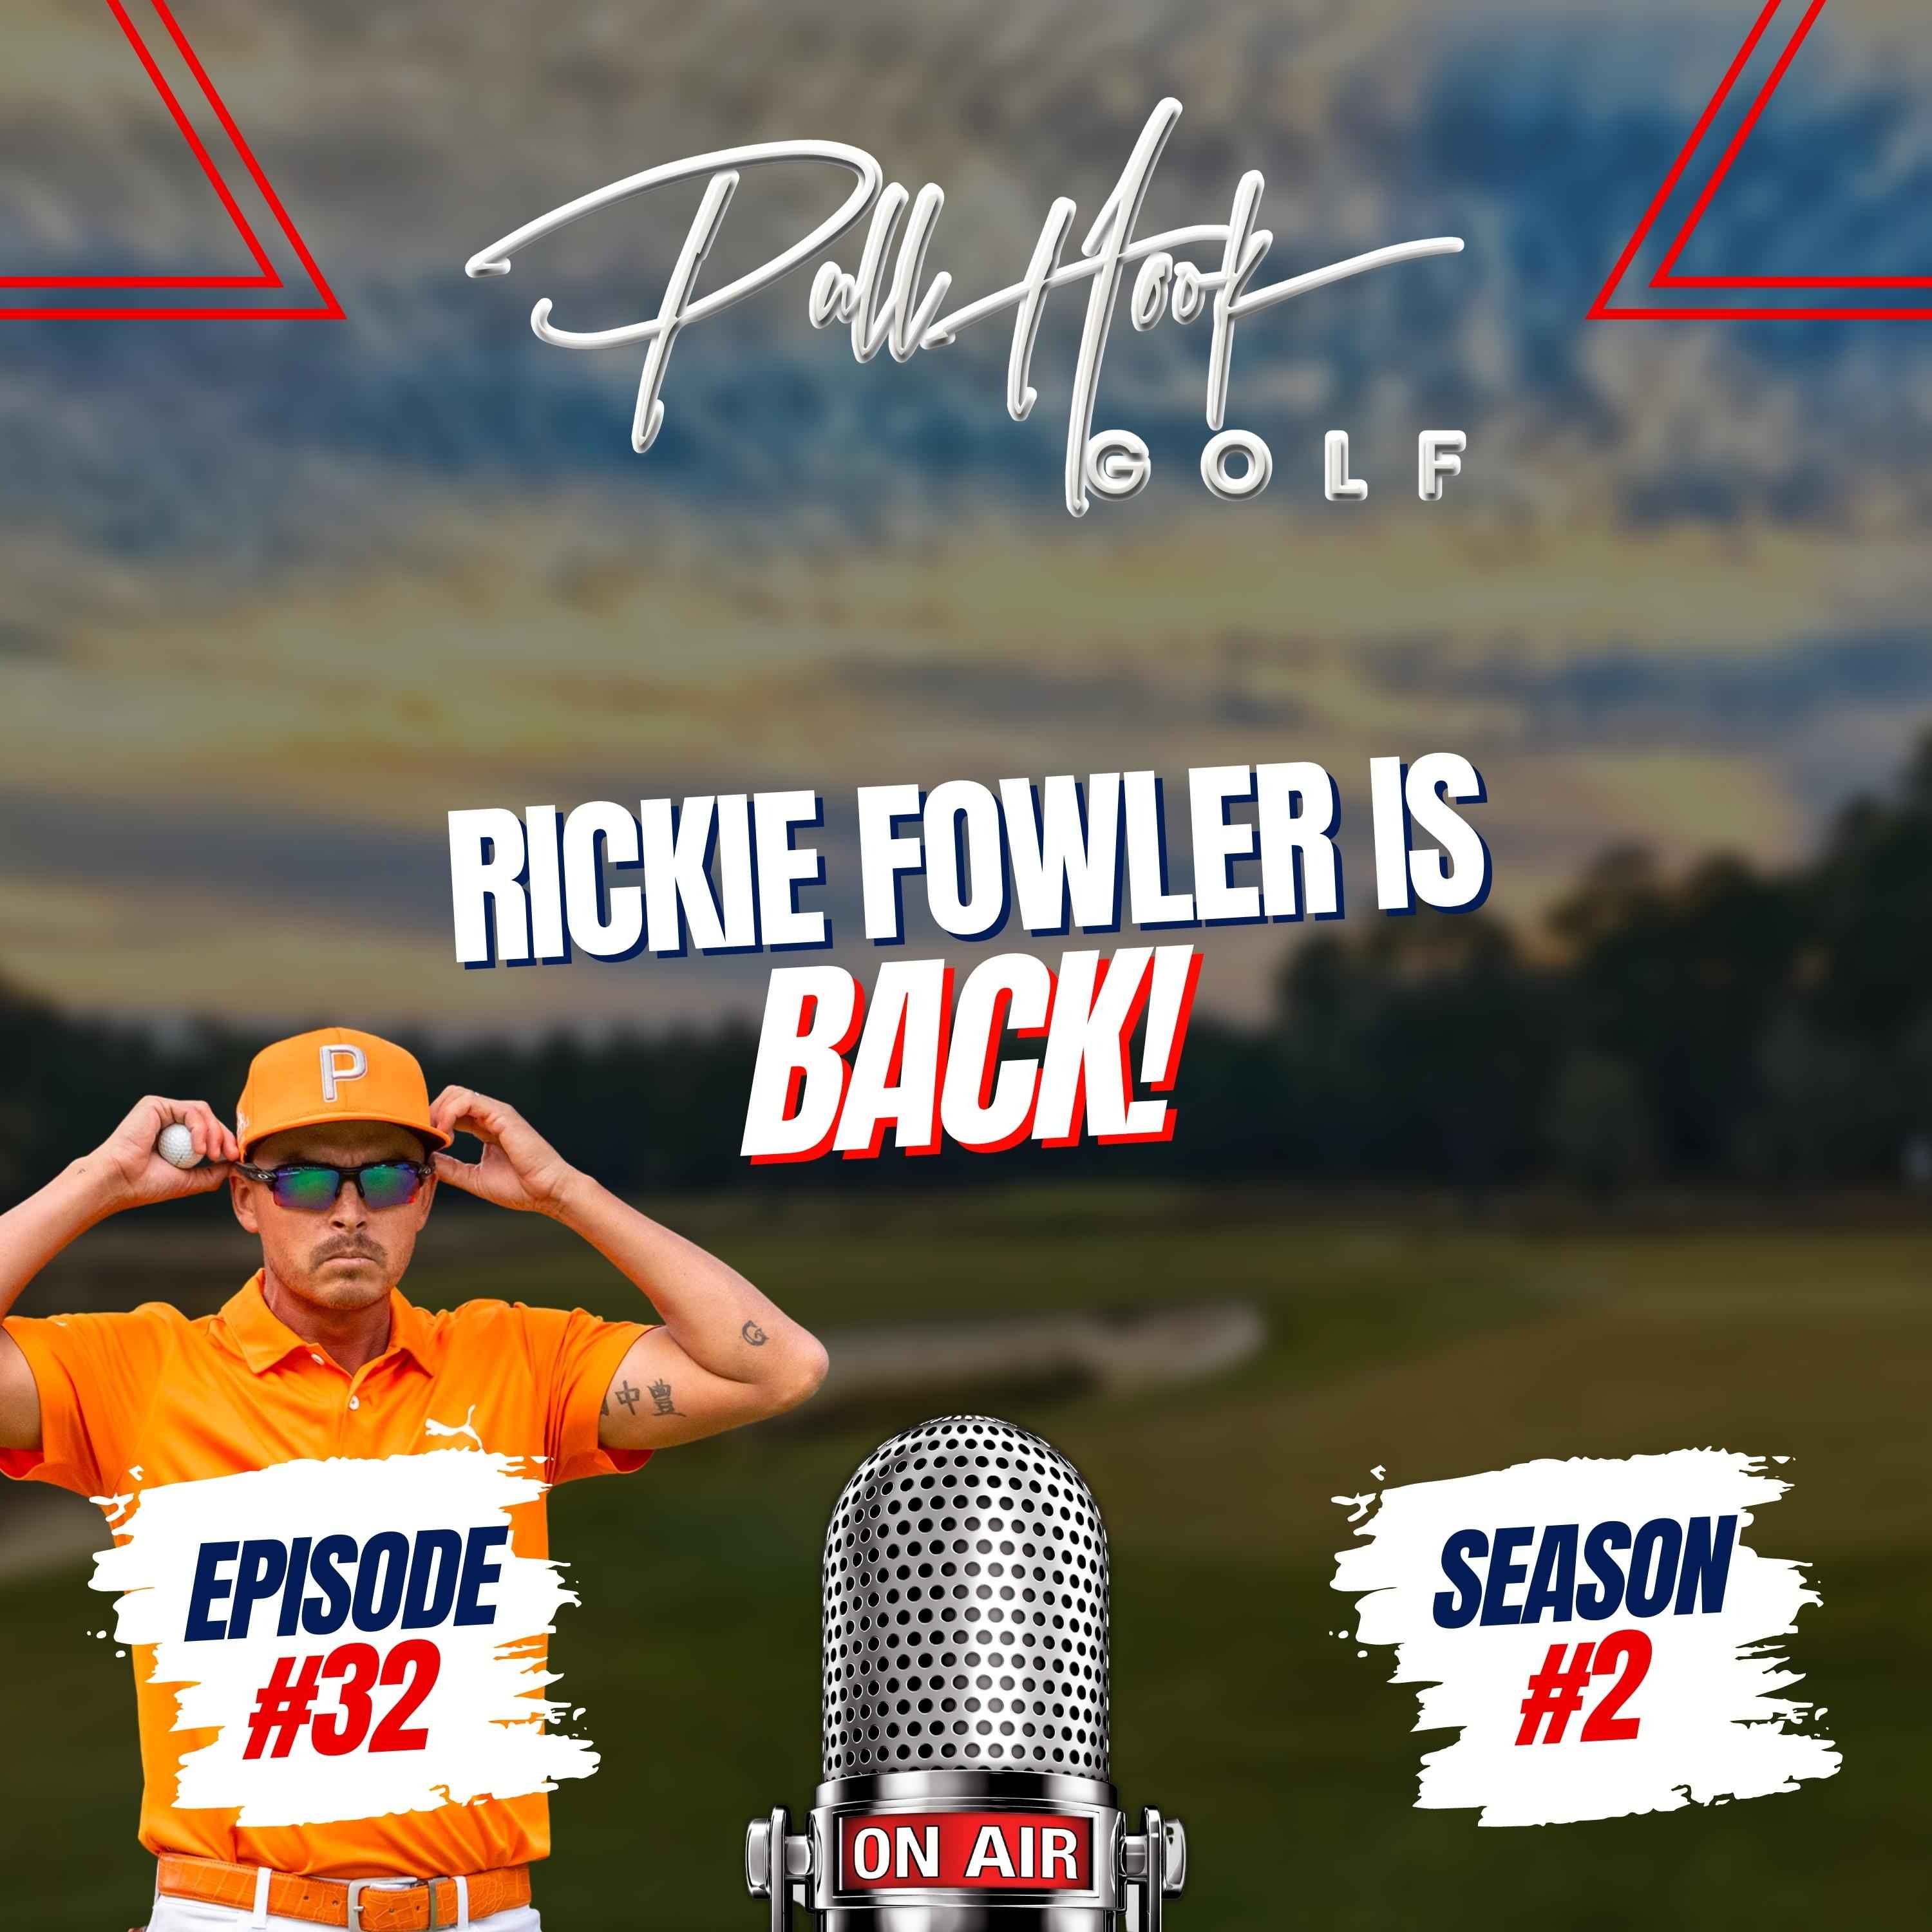 Rickie Fowler is Back!